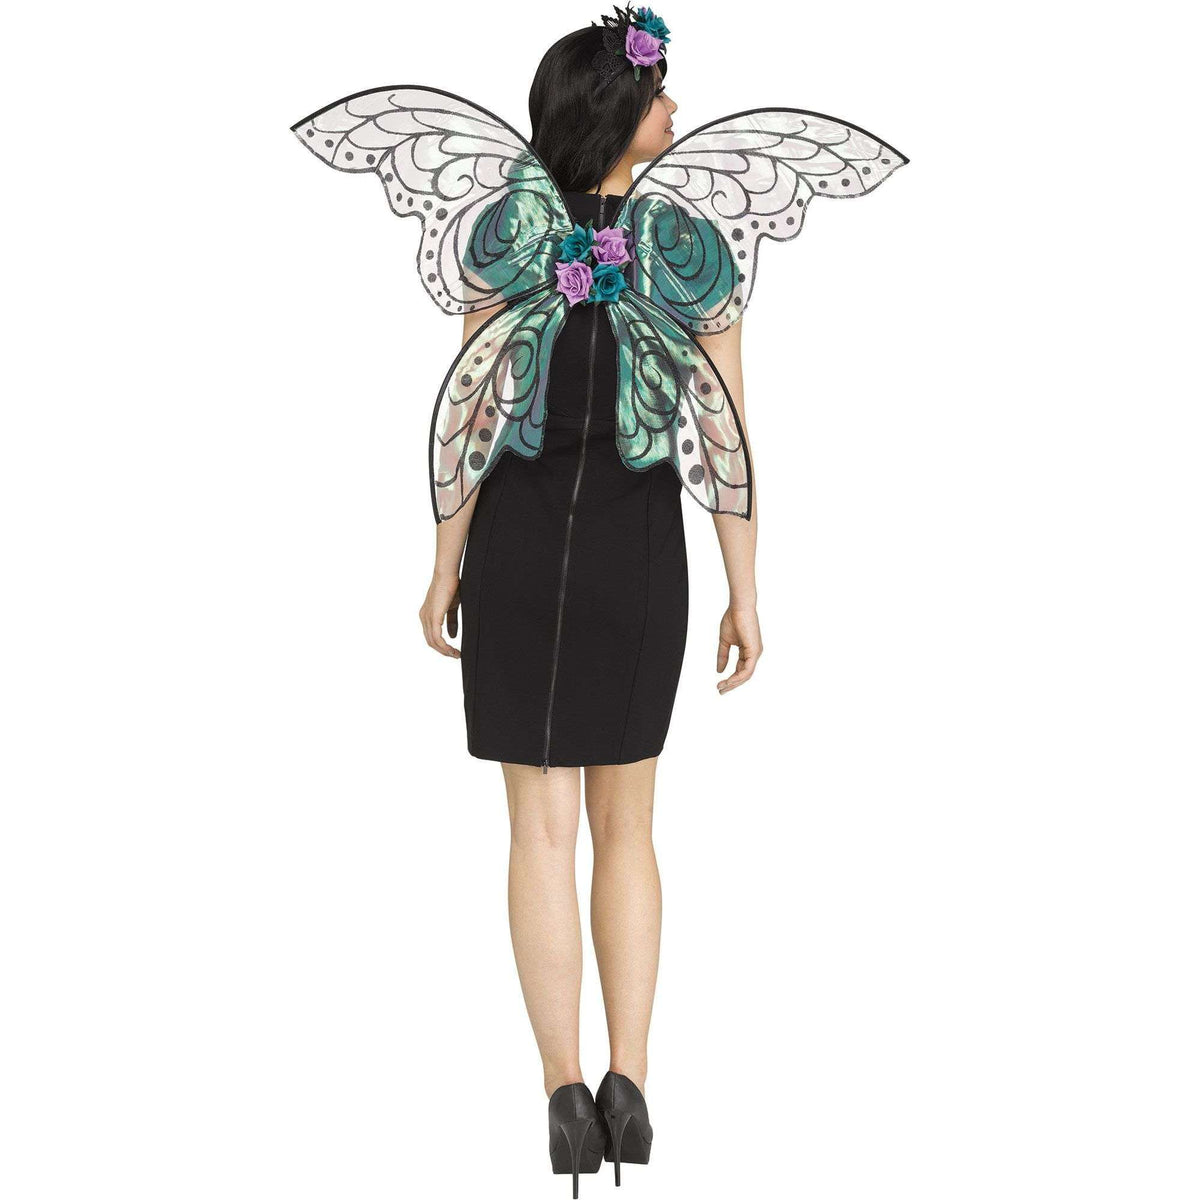 Fantasy Fairy with Flower Center Sparkle Wings